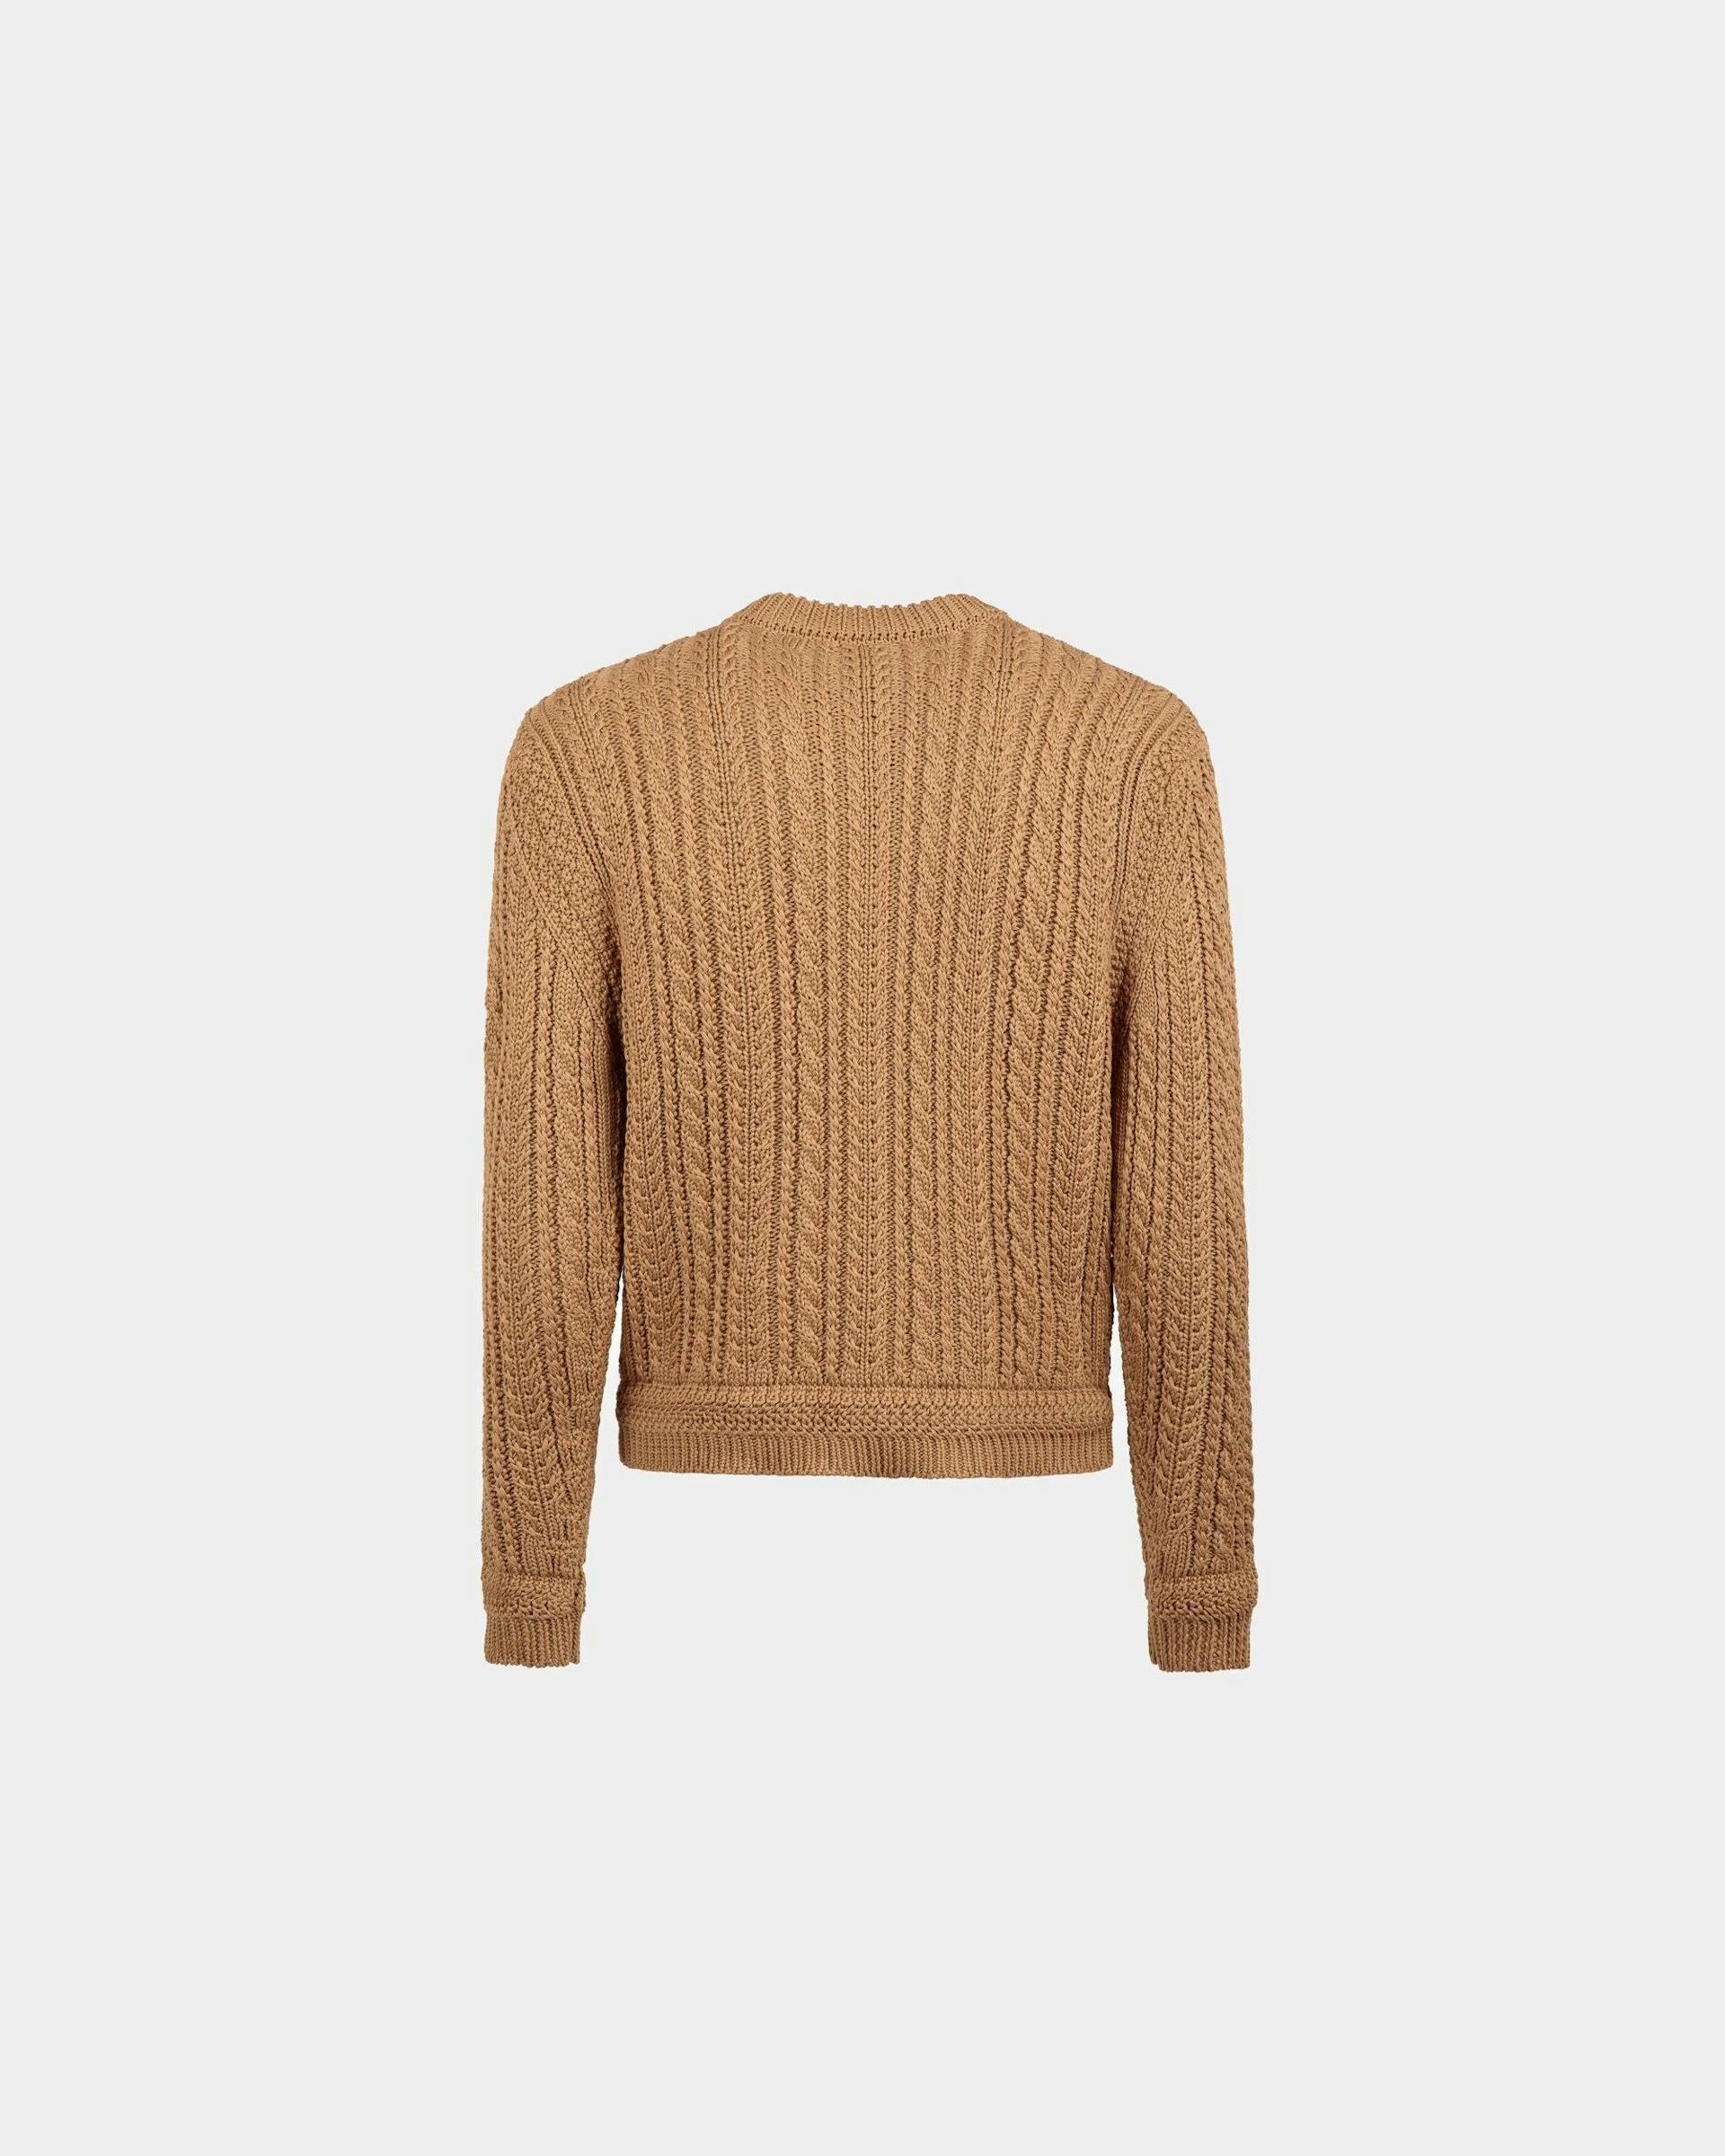 Men's Cable-knit Sweater in Camel Cotton | Bally | Still Life Back